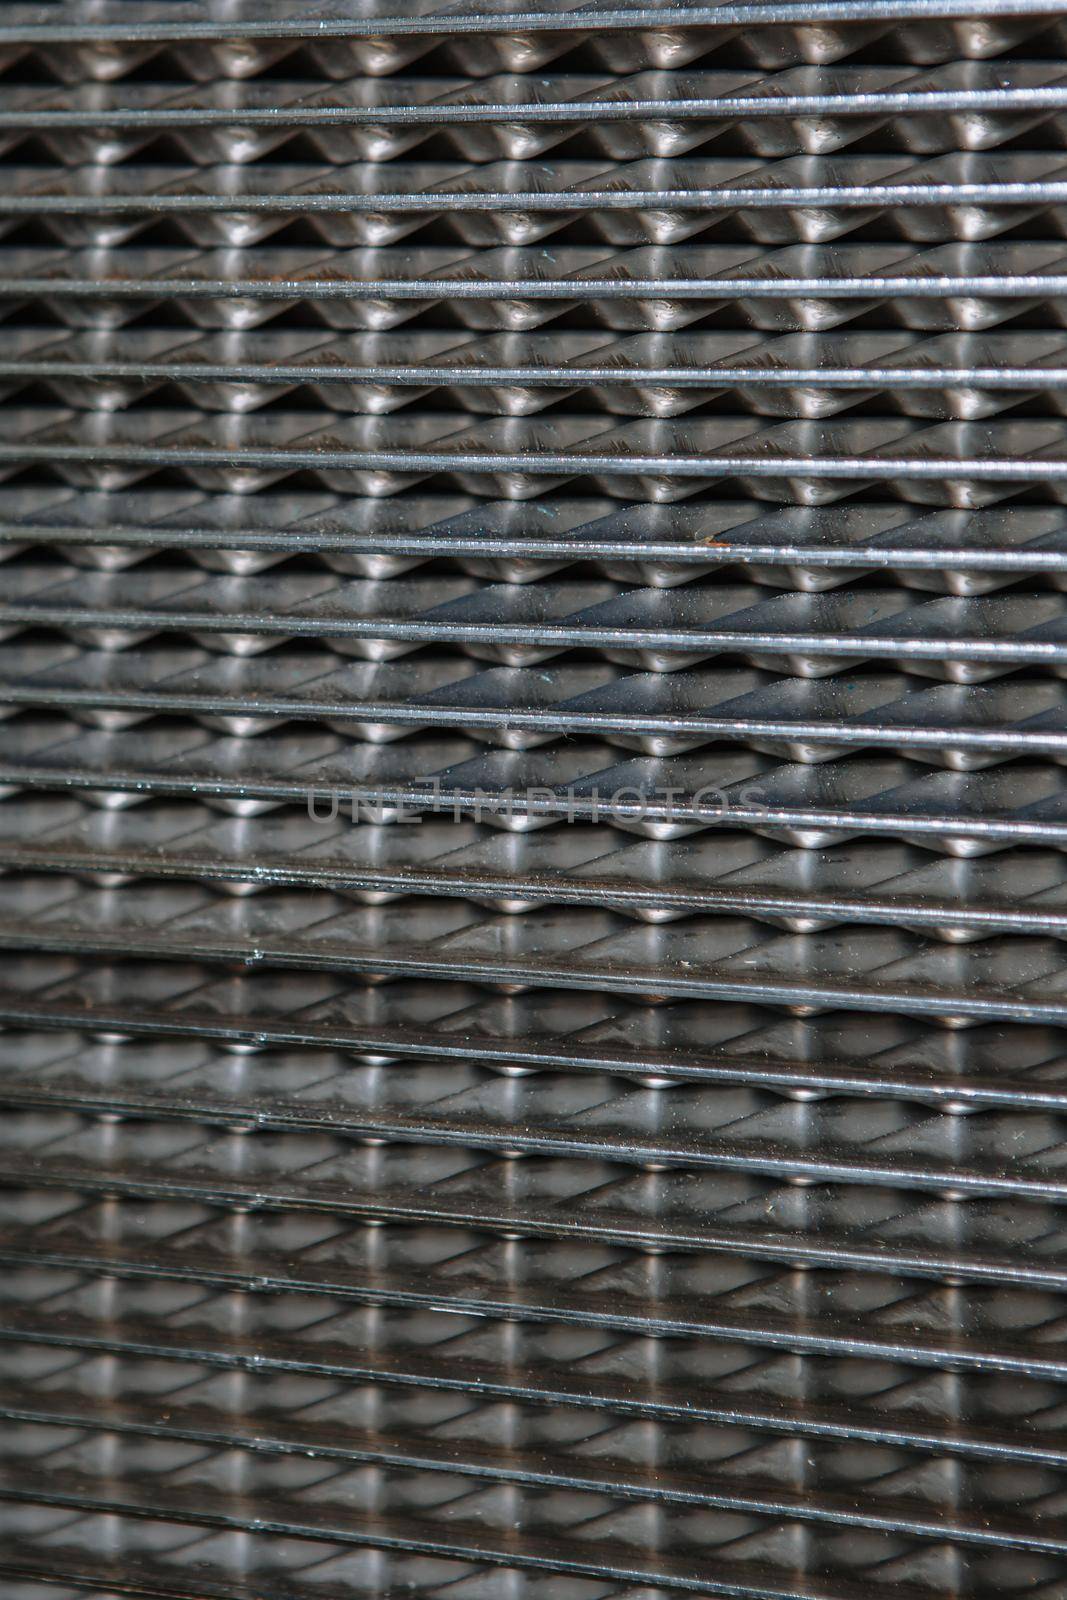 A metal heat exchanger grid consisting of small cells. Pattern